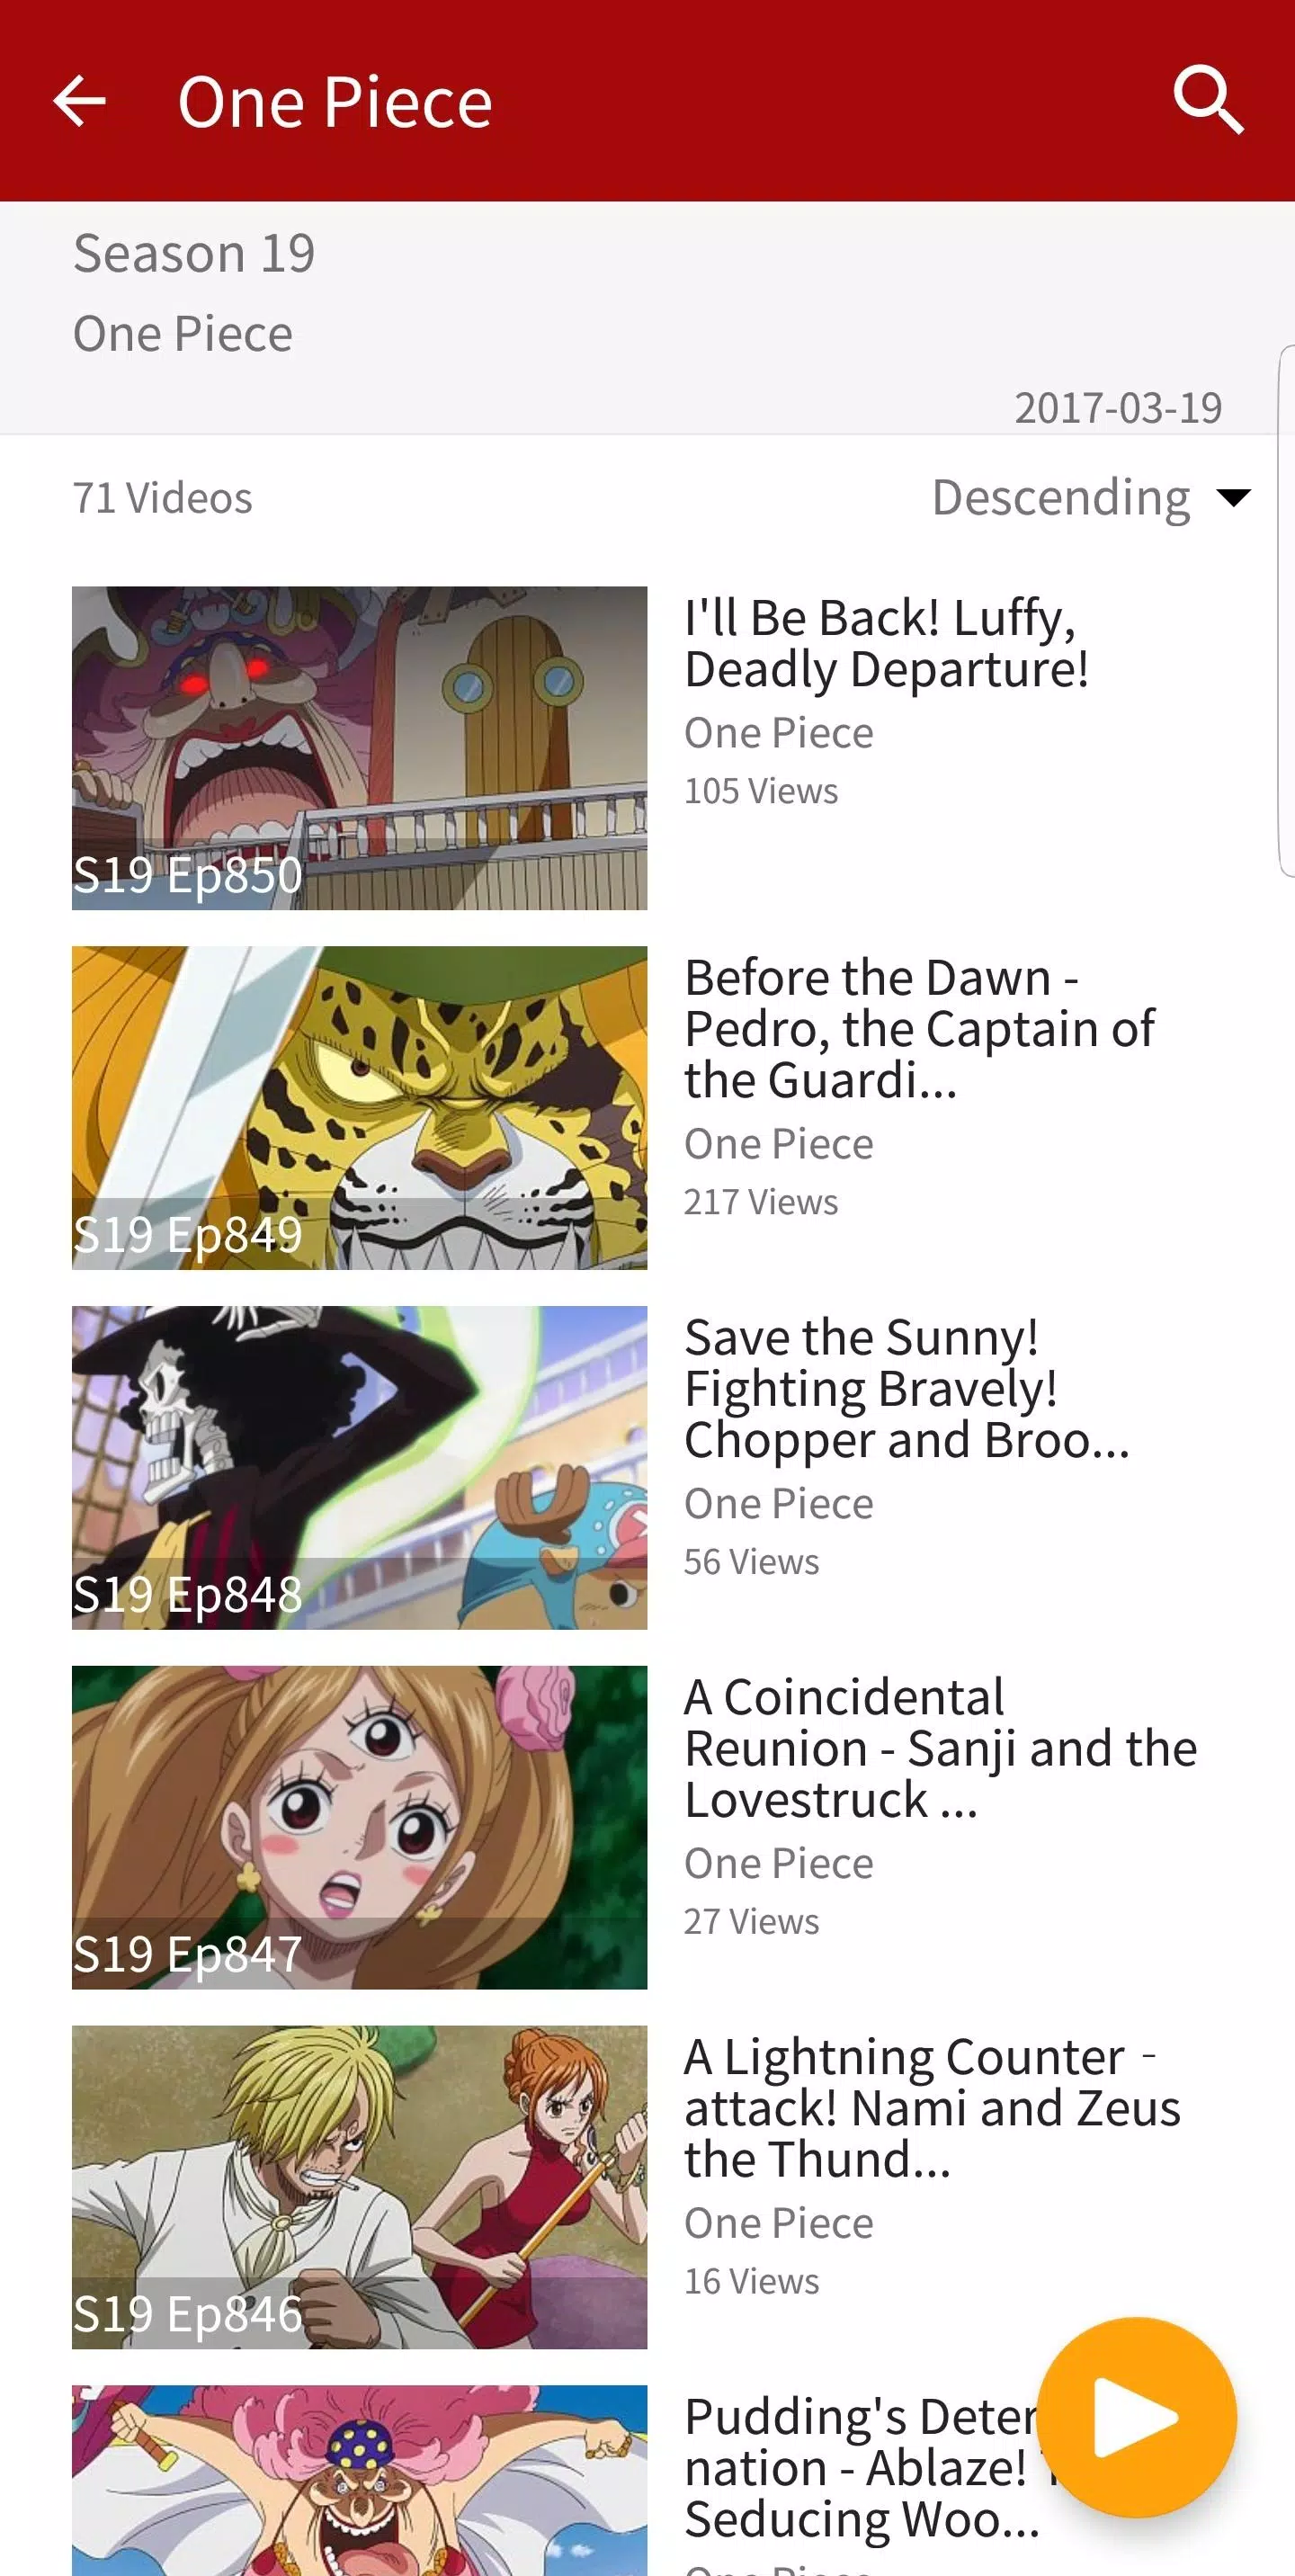 Anim Fanz APK (Android App) - Free Download